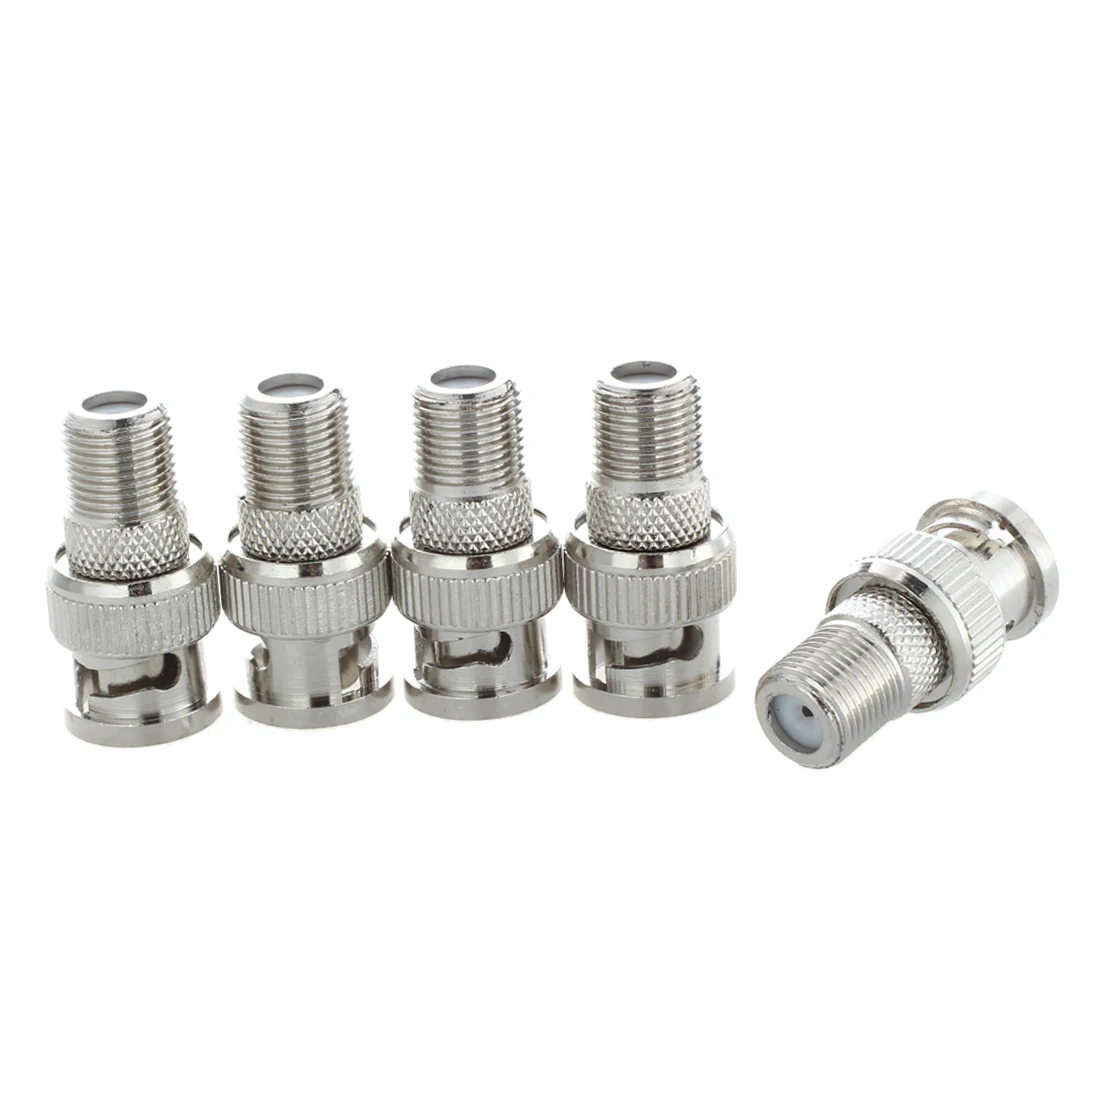 10x BNC Male Plug to F Female Jack Adapter Coax Connector Coupler CCTV Camera 